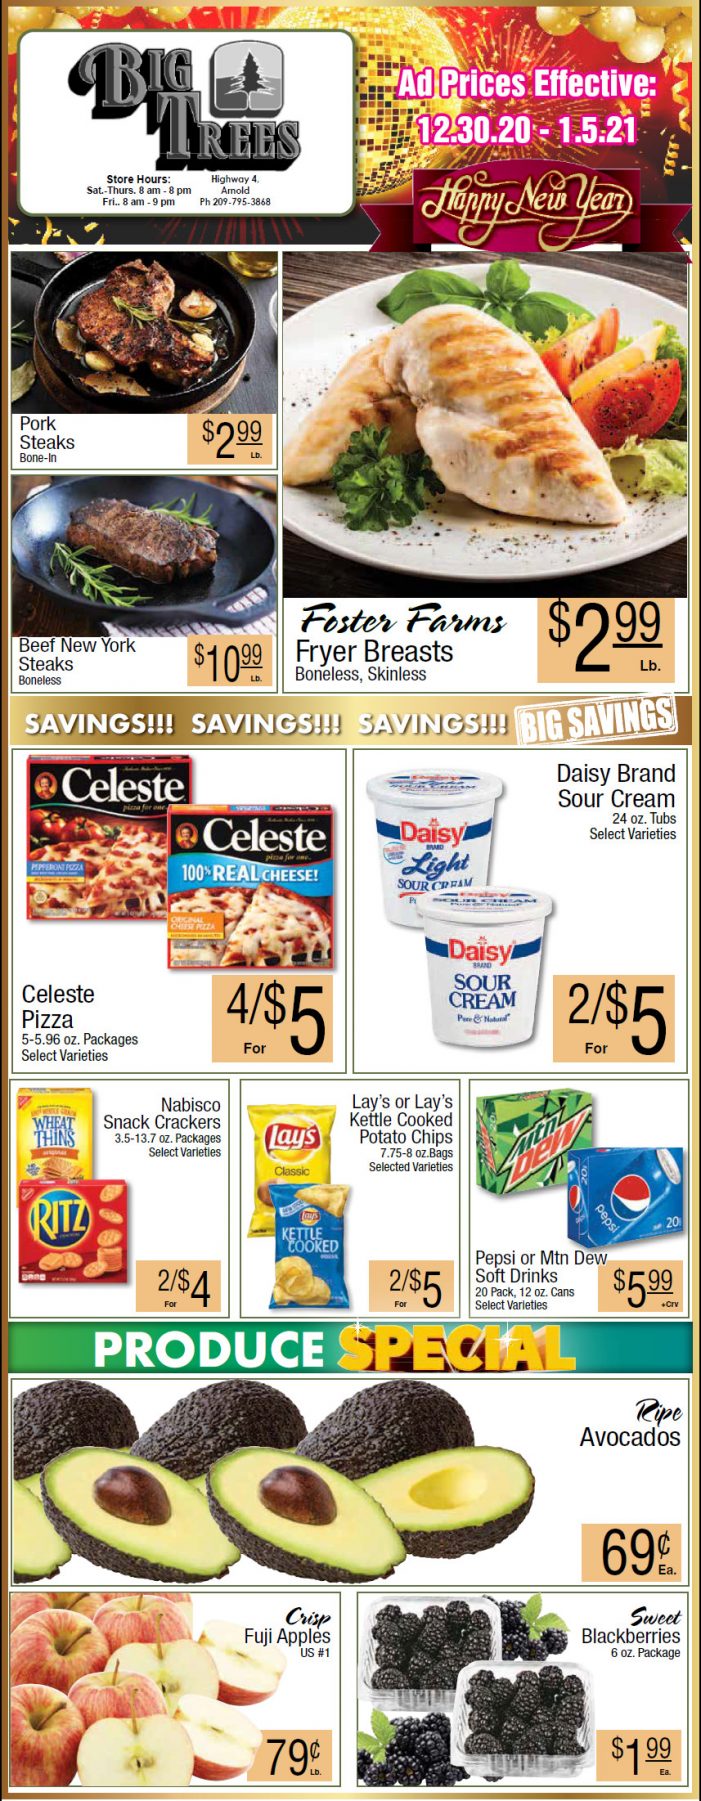 Big Trees Market Weekly Ad & Grocery Specials Through January 5th